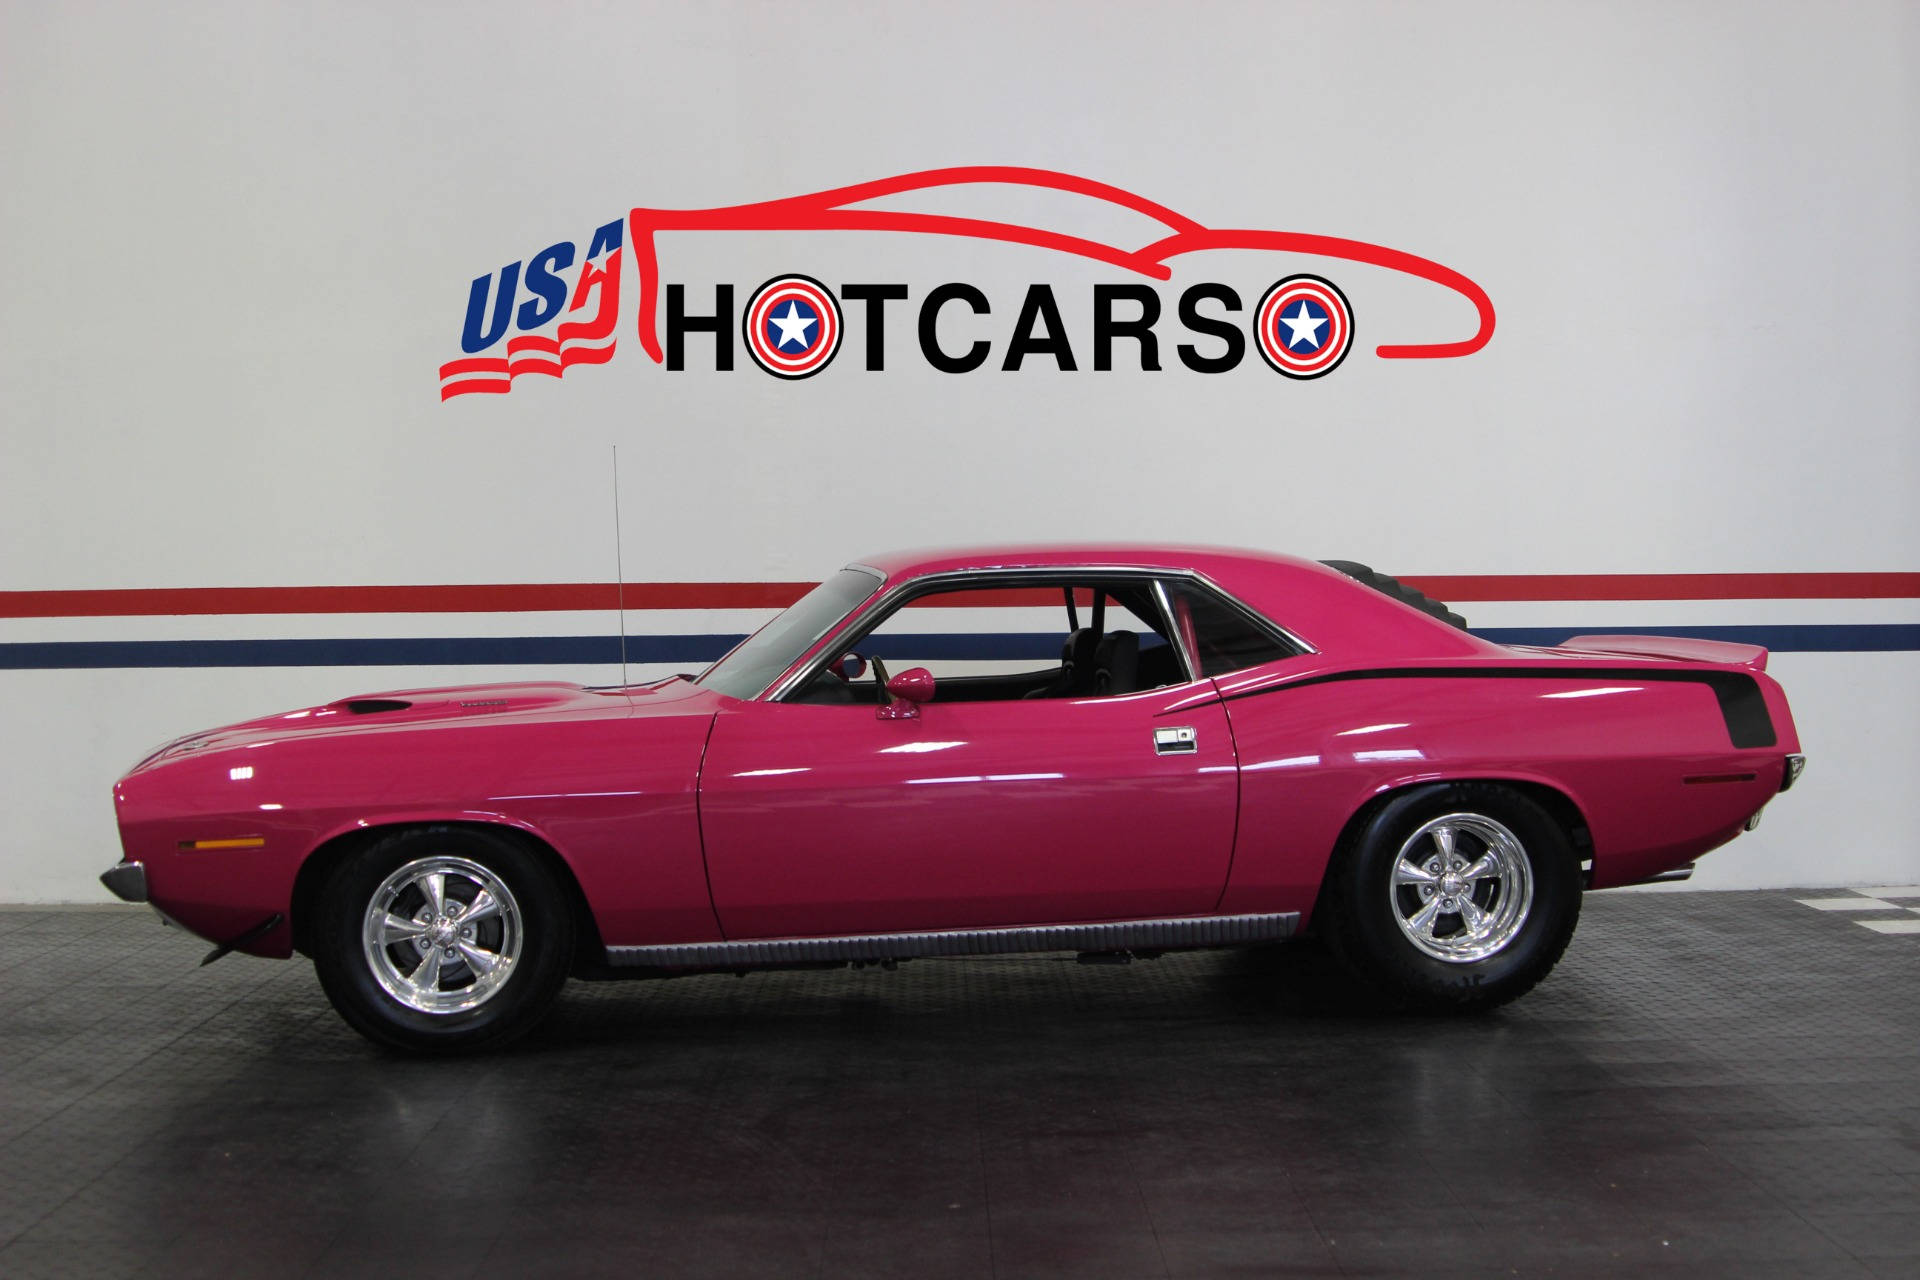 Plymouth Barracuda In Usa Hot Cars